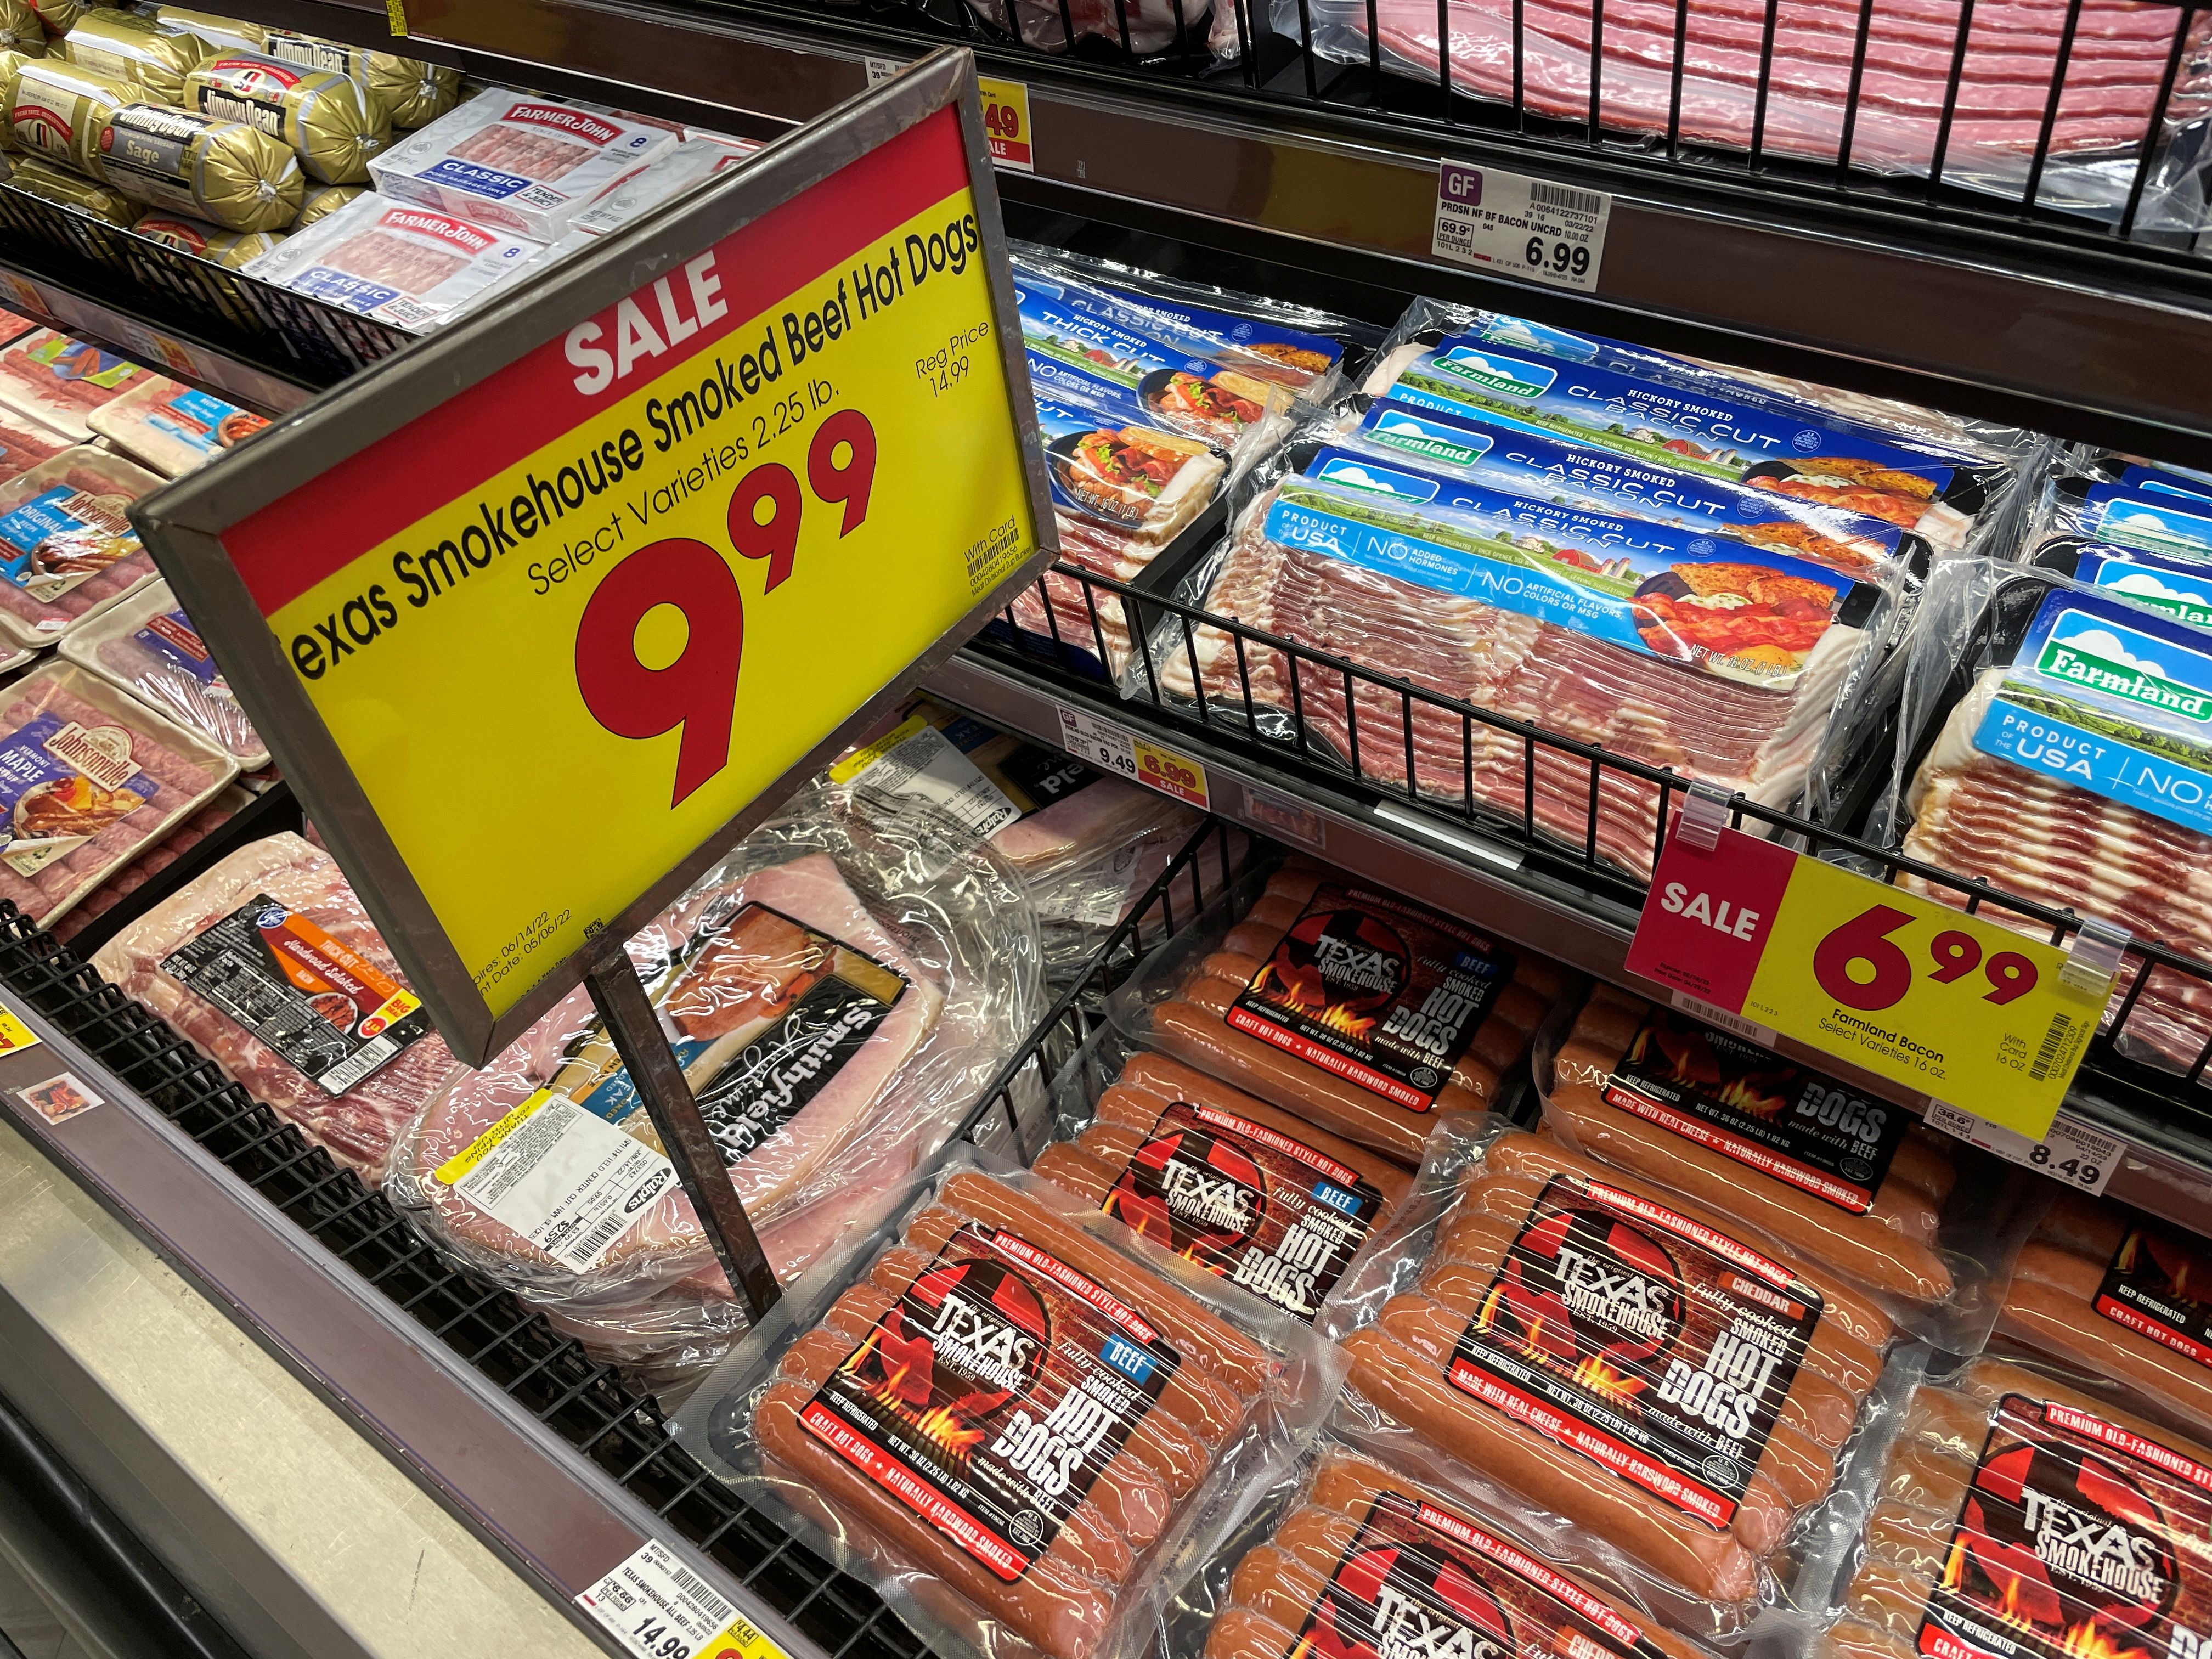 Hot dog sausages are seen in a supermarket in Los Angeles as inflation continues to hit consumers with the annual CPI increasing 8.3% in the 12 months through April